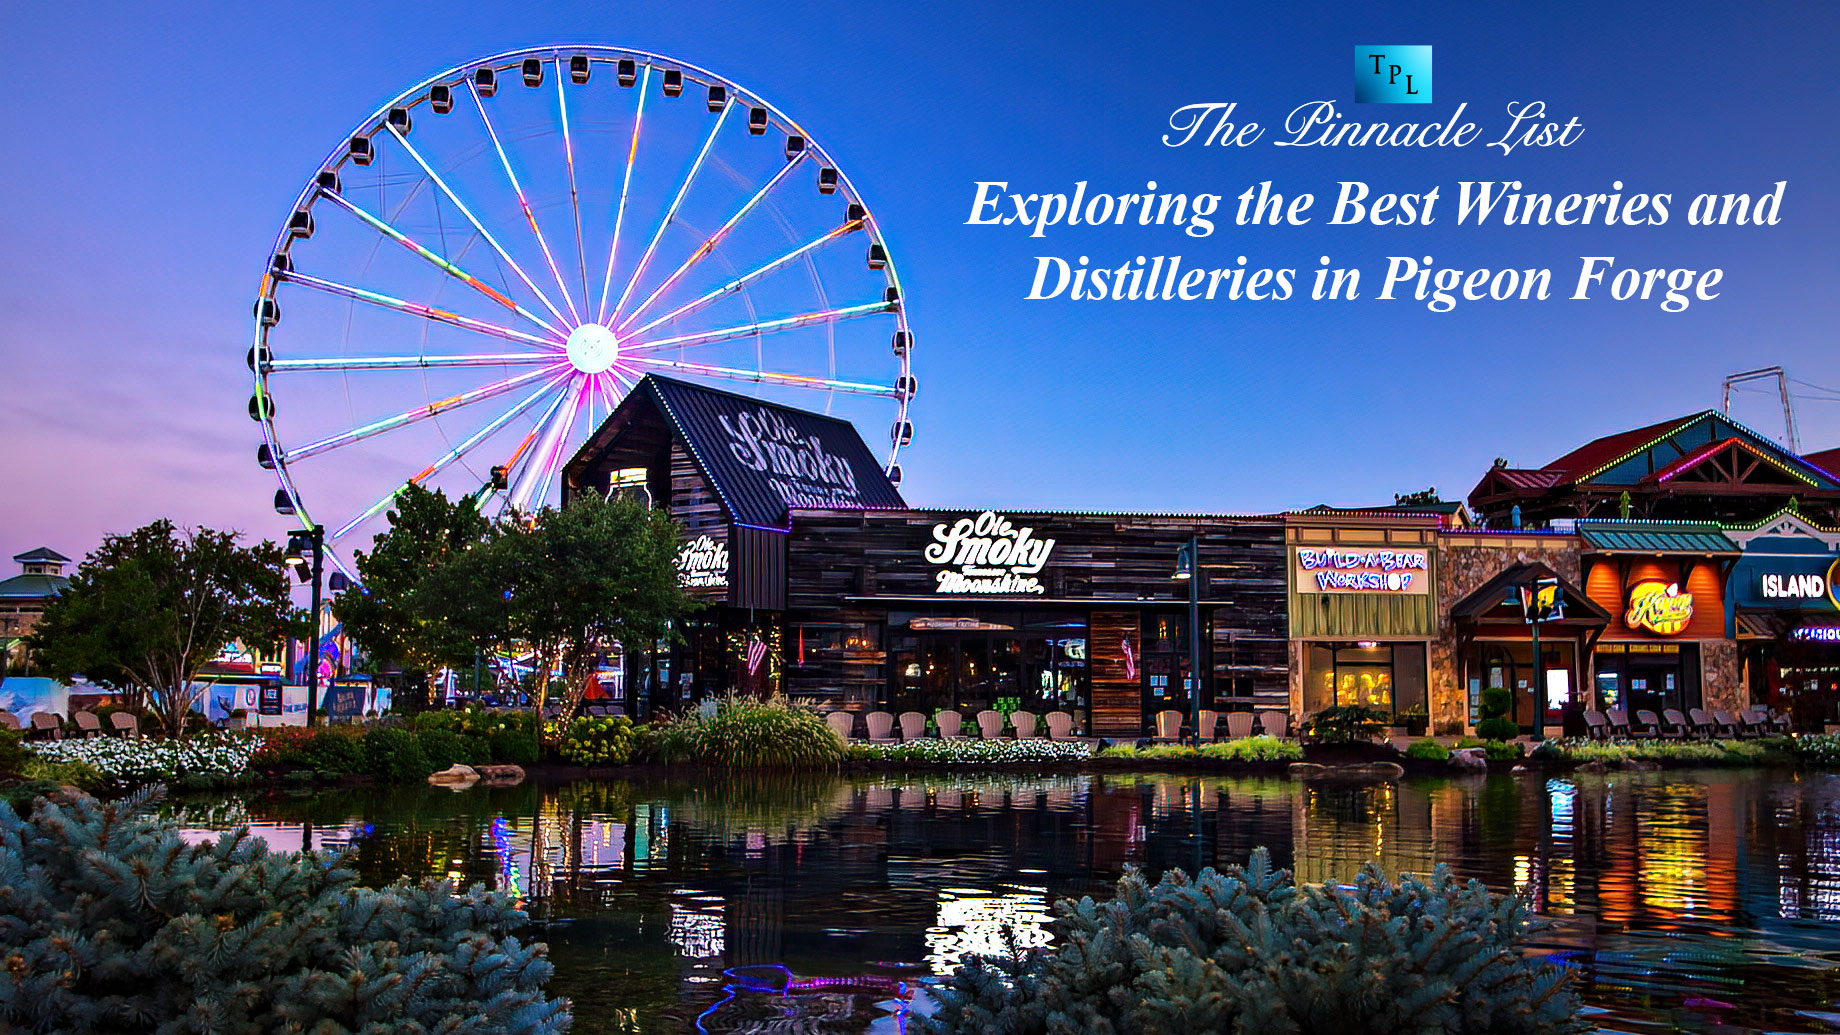 Exploring the Best Wineries and Distilleries in Pigeon Forge